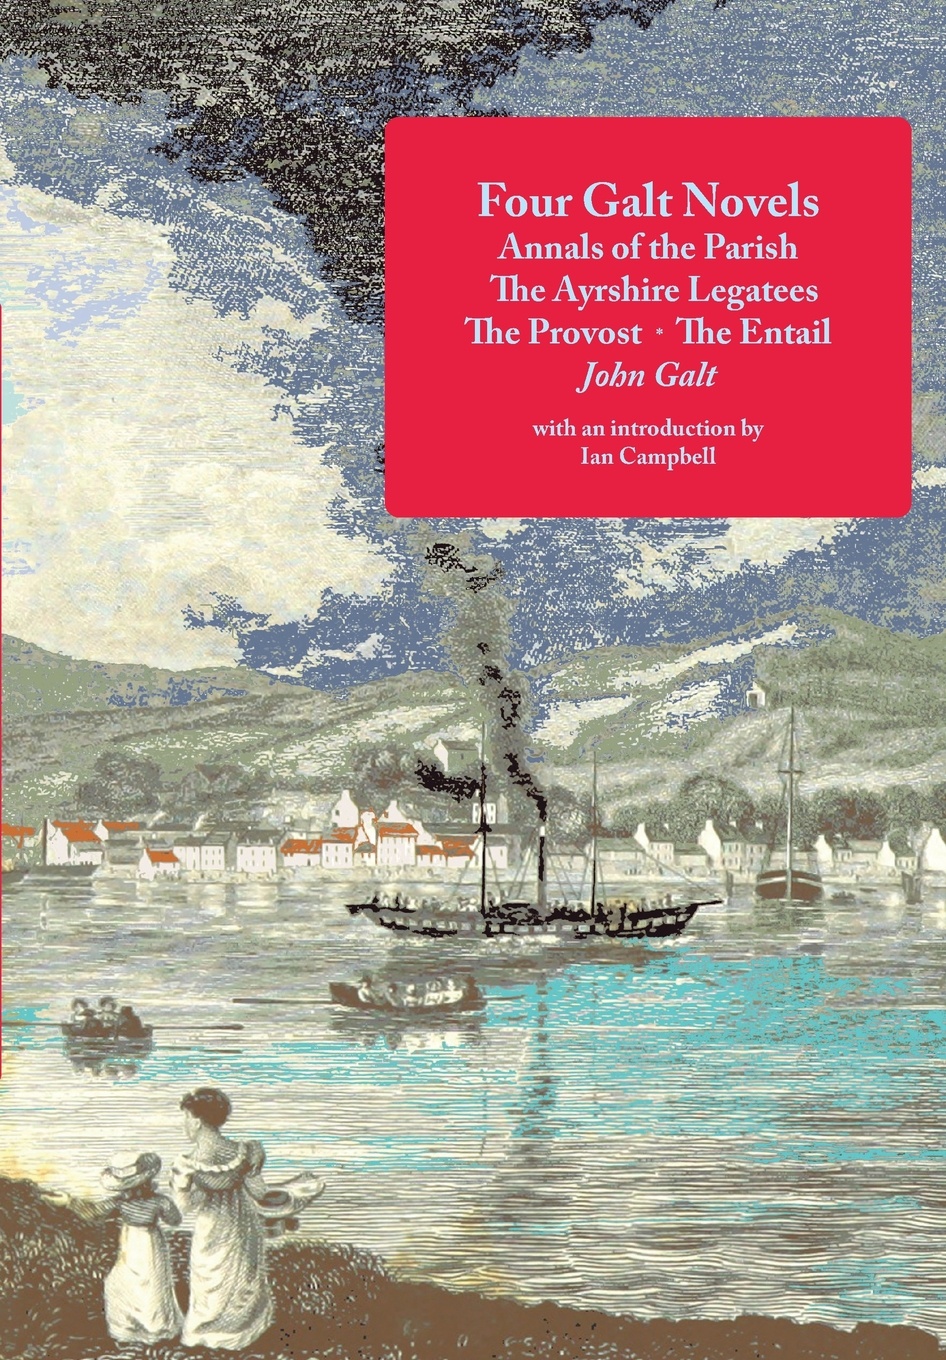 Four Galt Novels. Annals of the Parish, The Ayrshire Legatees, The Provost, The Entail